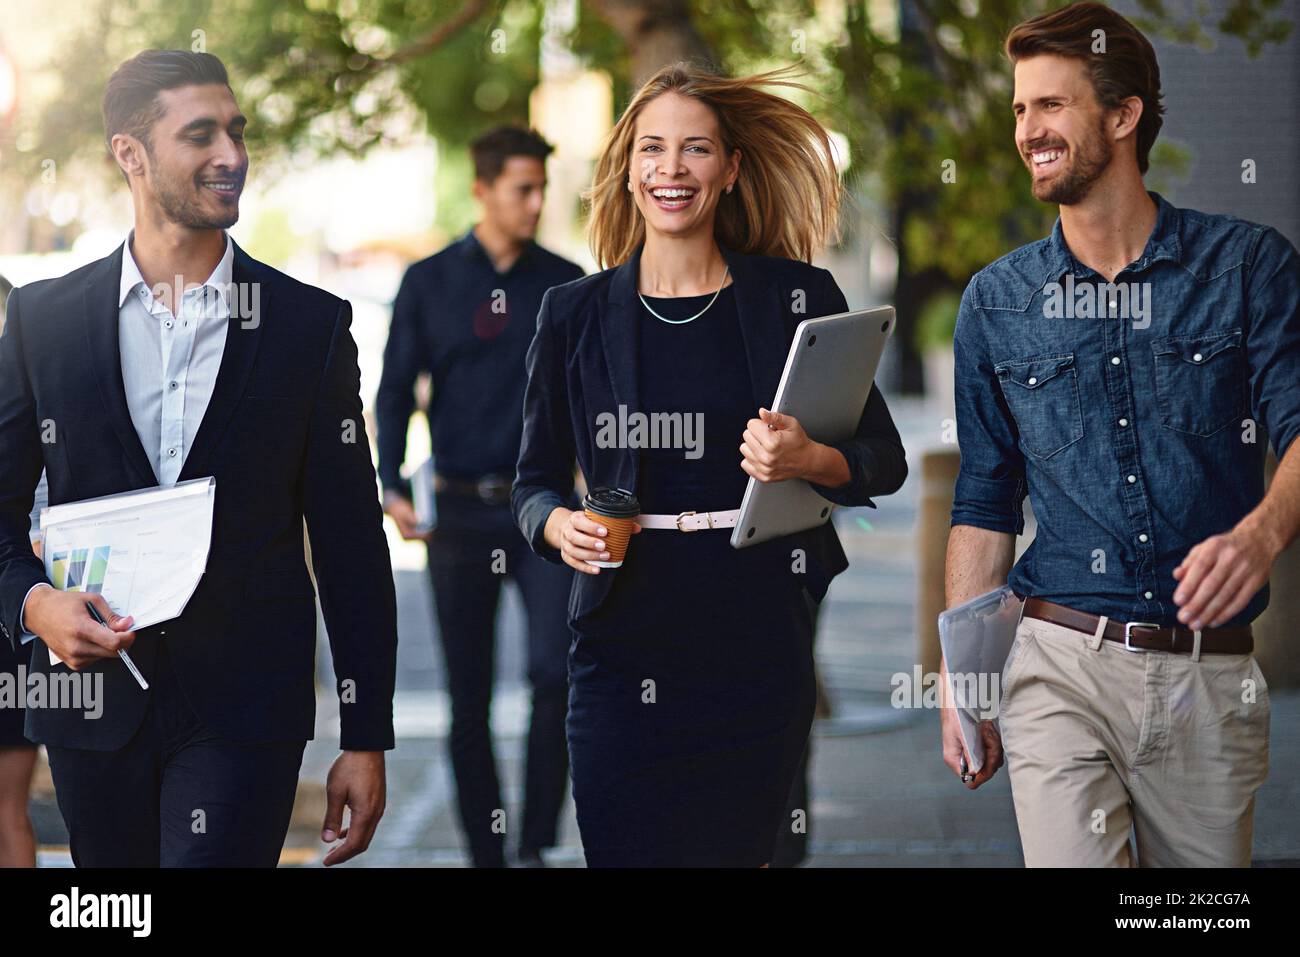 The team that keeps up with the pace of business. Shot of corporate colleagues walking down the street. Stock Photo